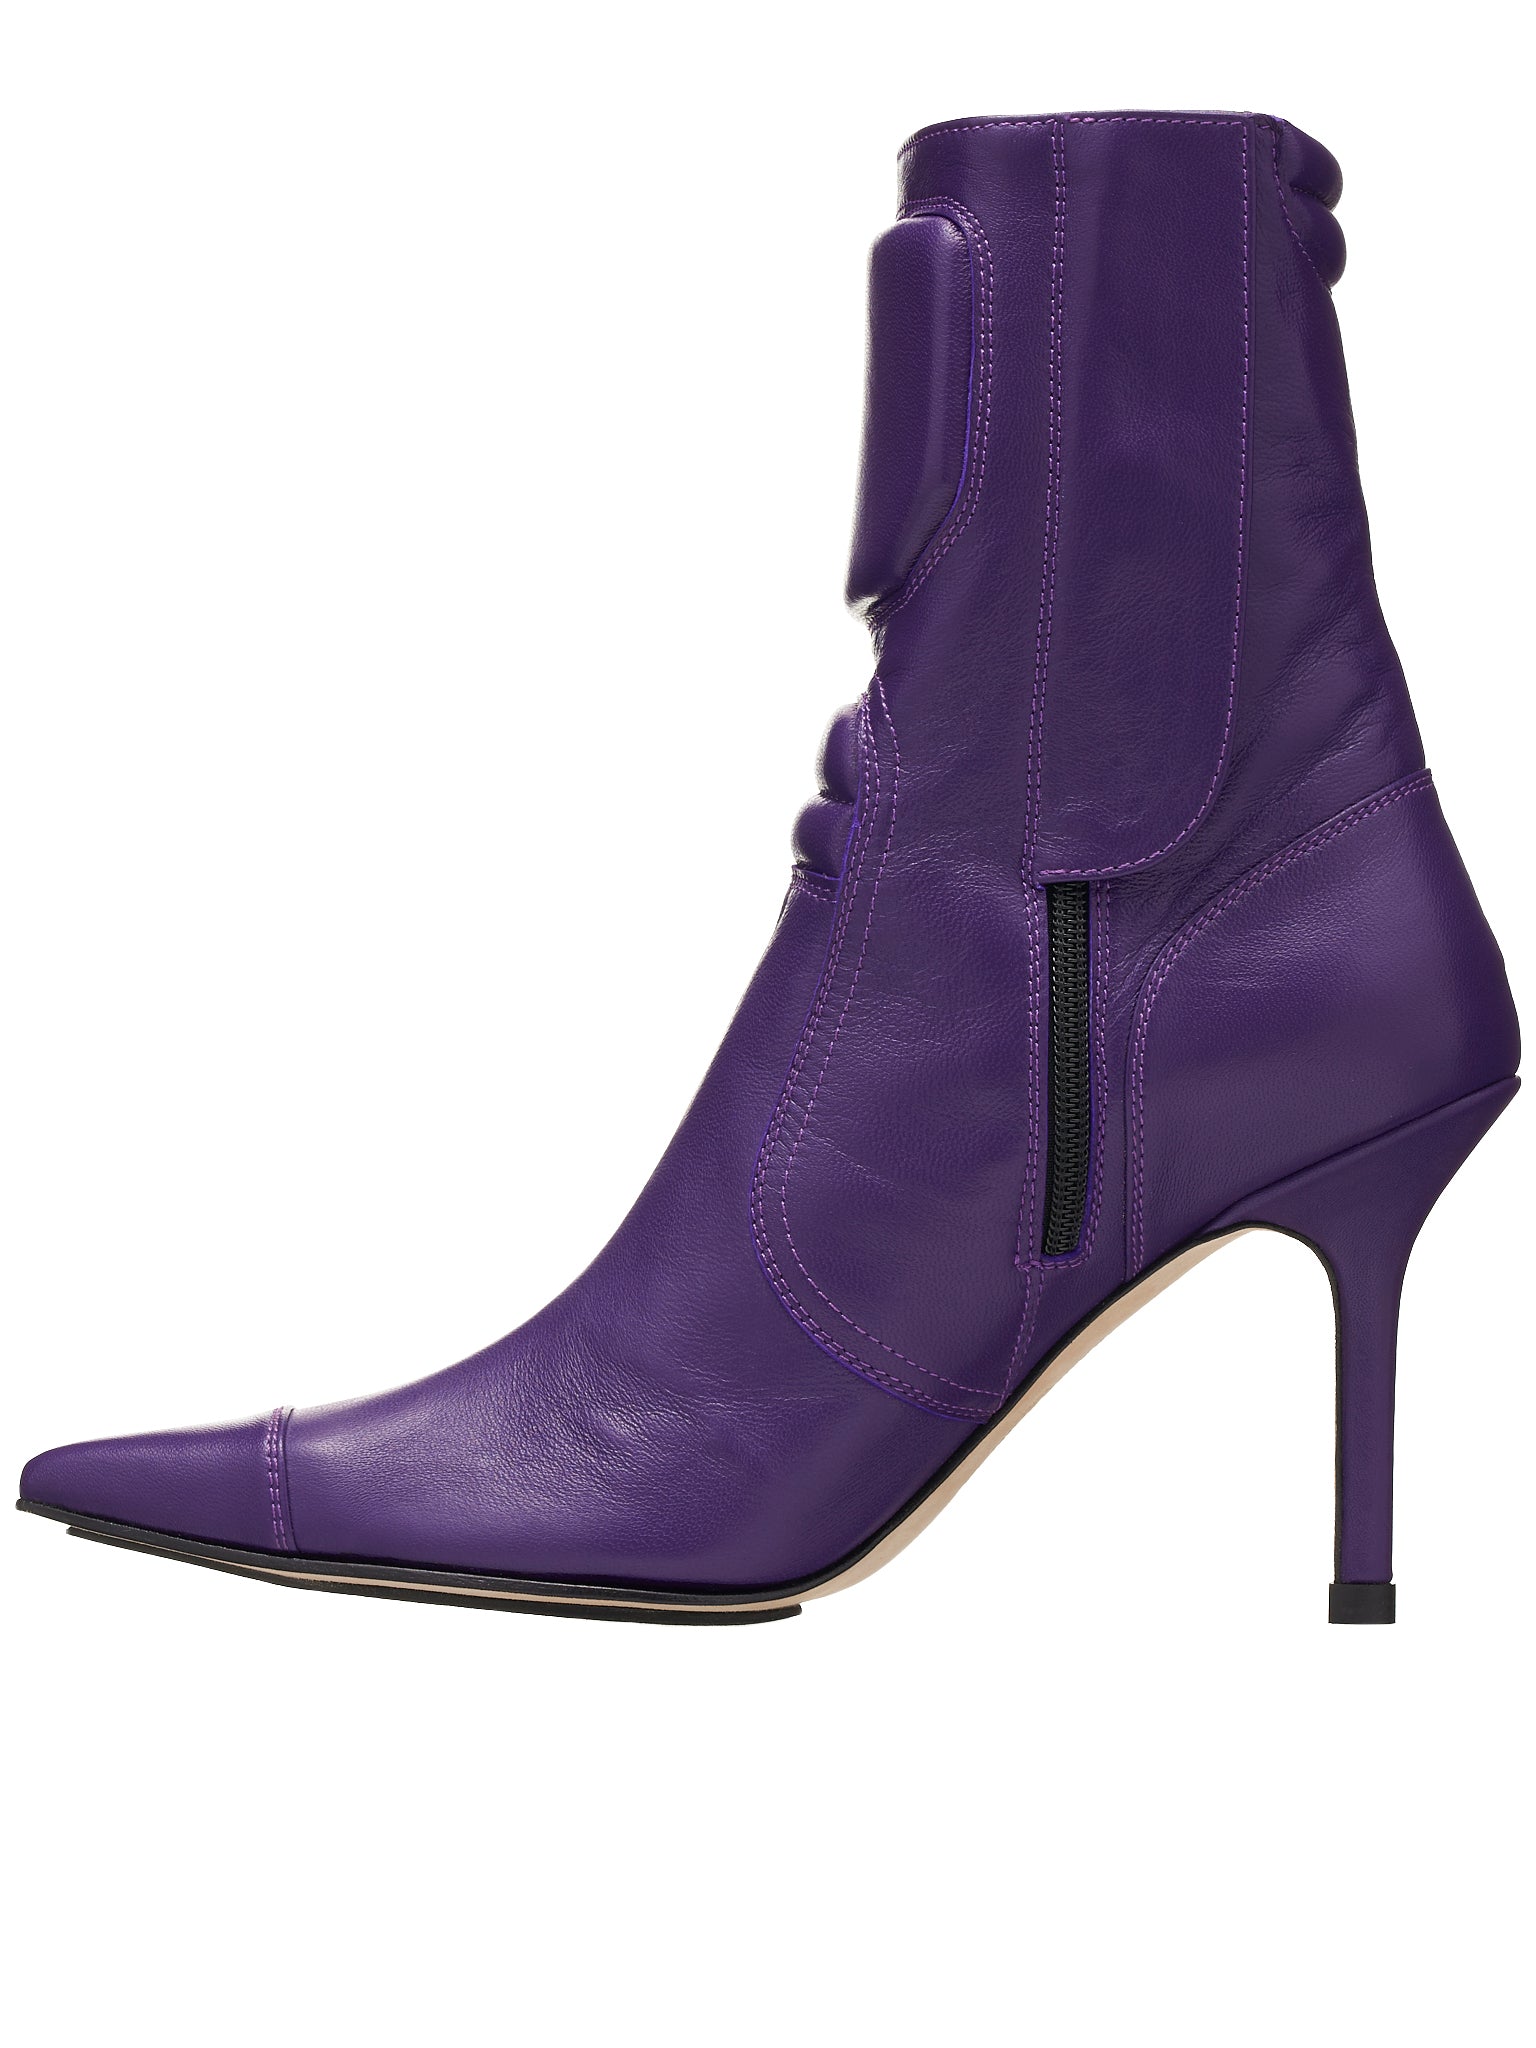 Padded Leather Boots (WW-SHOES-5-PURPLE)